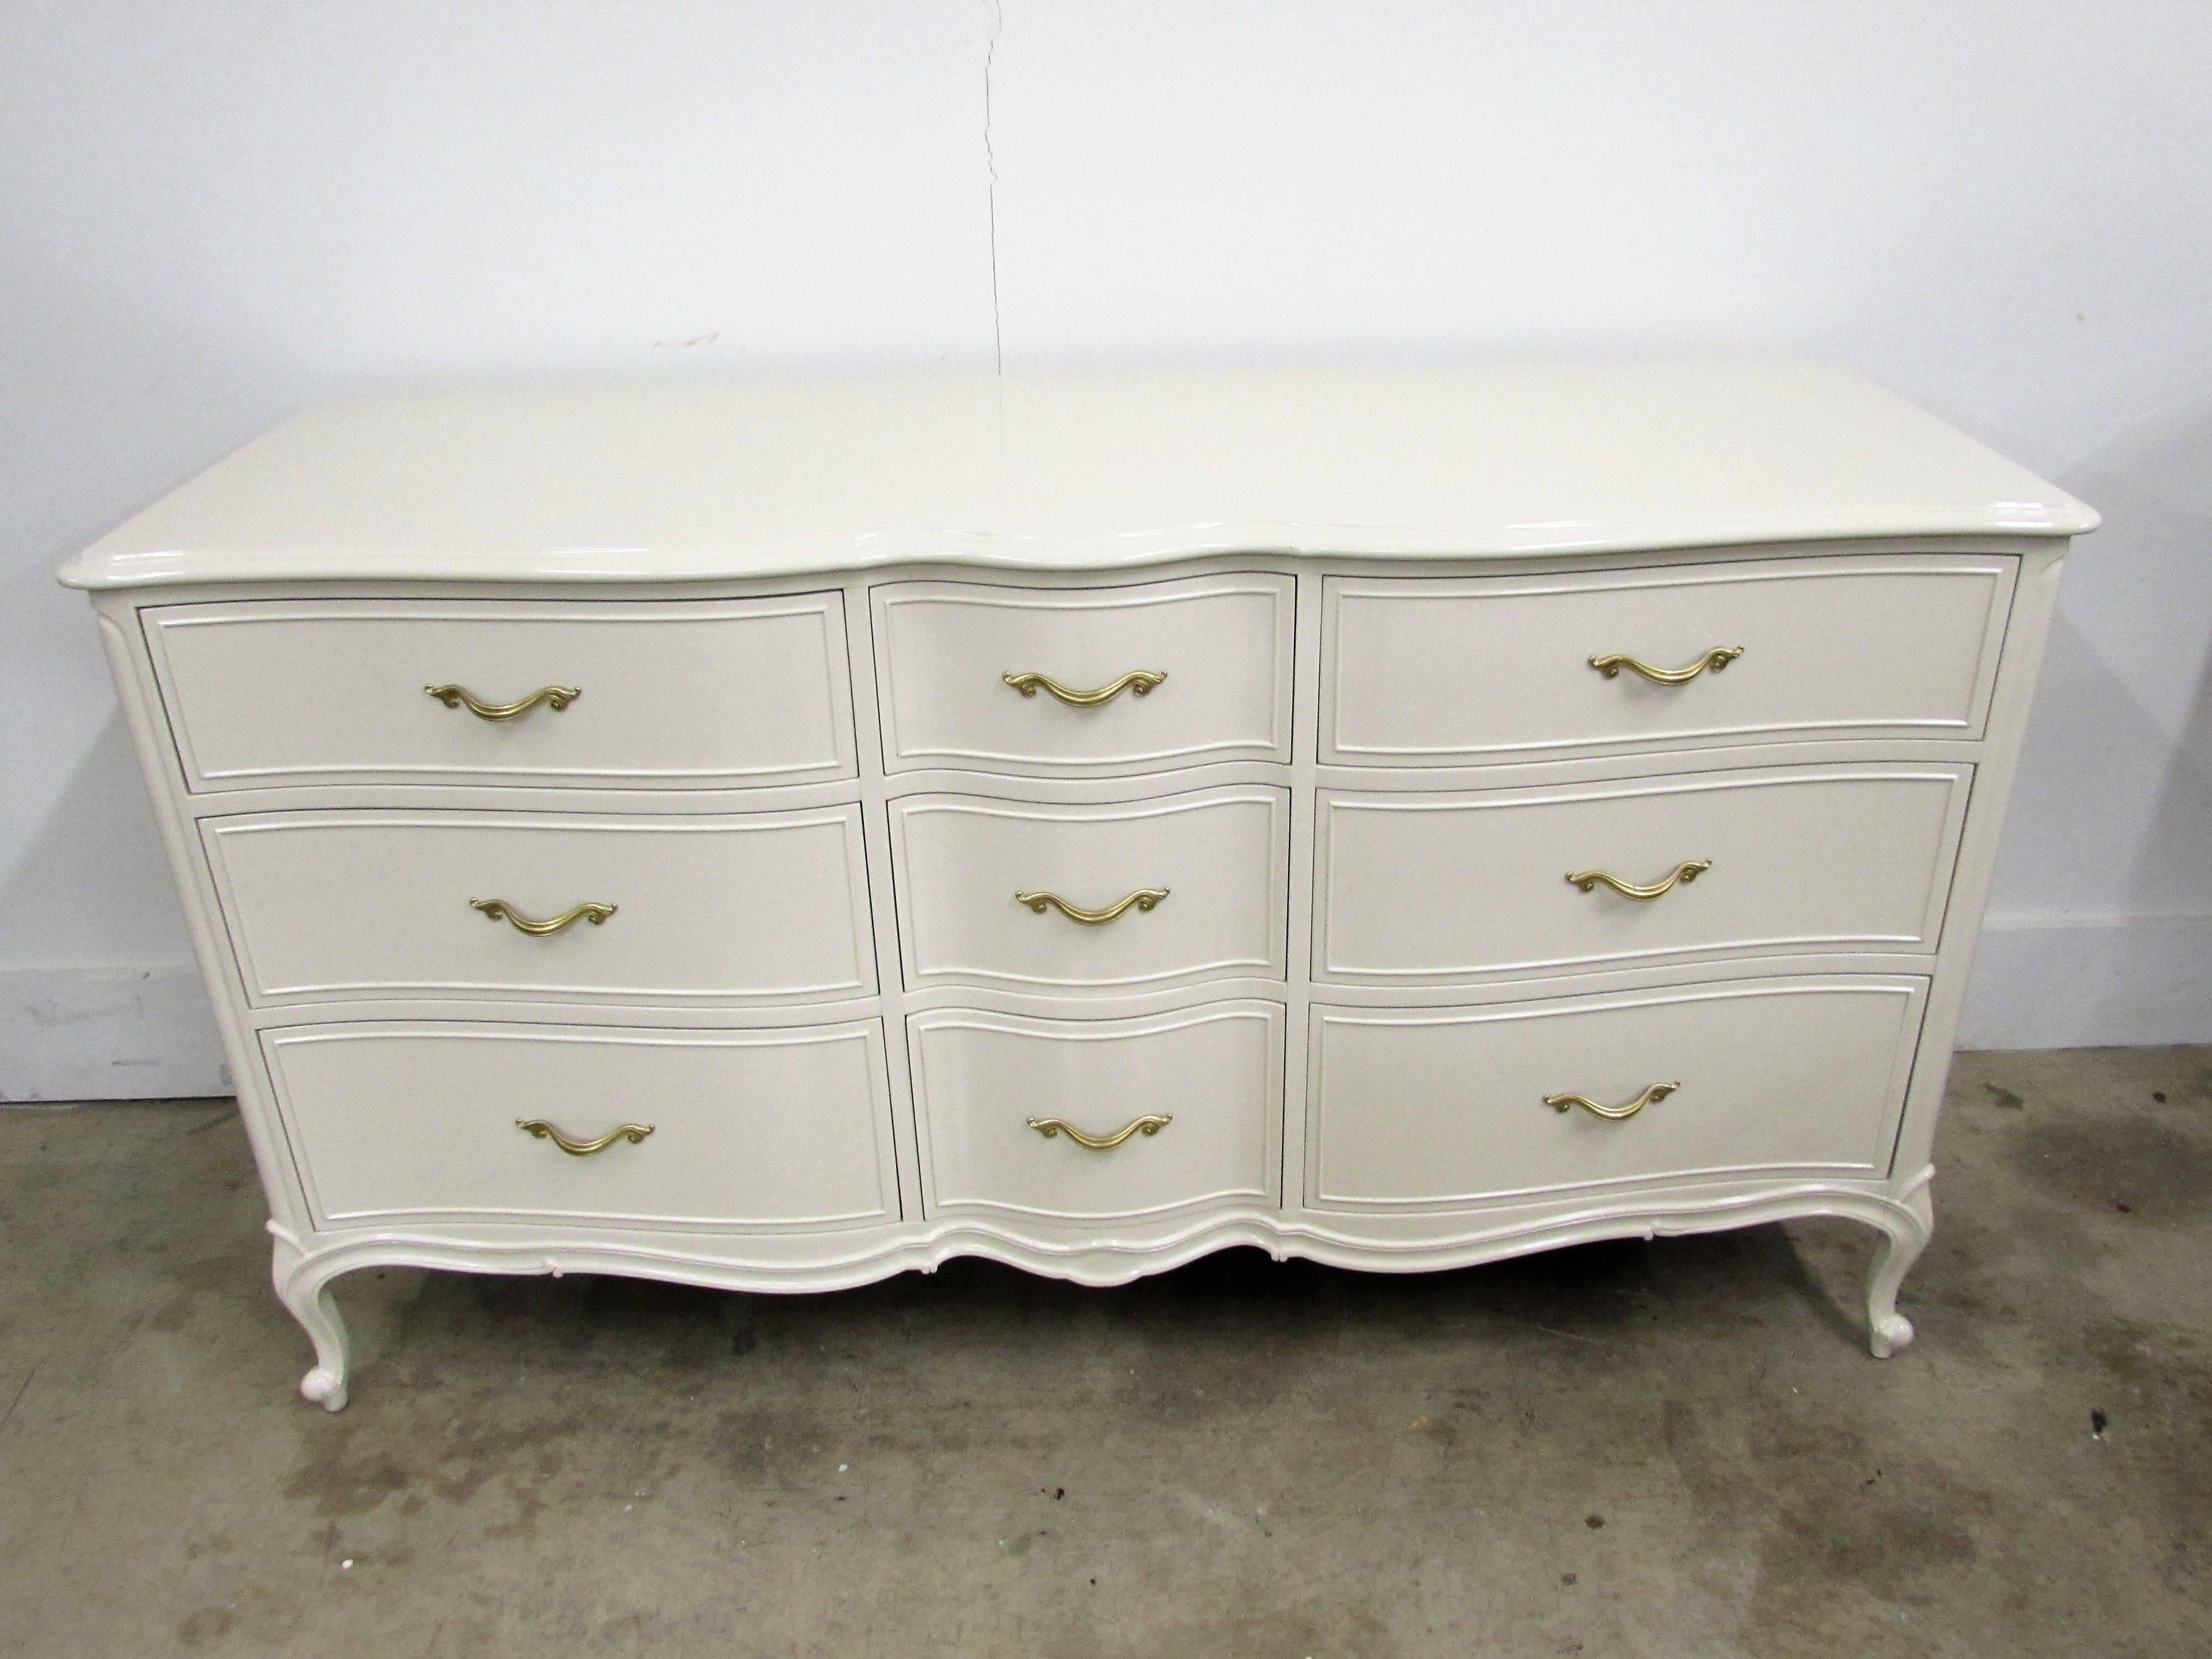 Drexel French chest of nine dovetail drawers lacquered in-house in Benjamin Moore natural cream and original French hardware customized in our gold under brass.